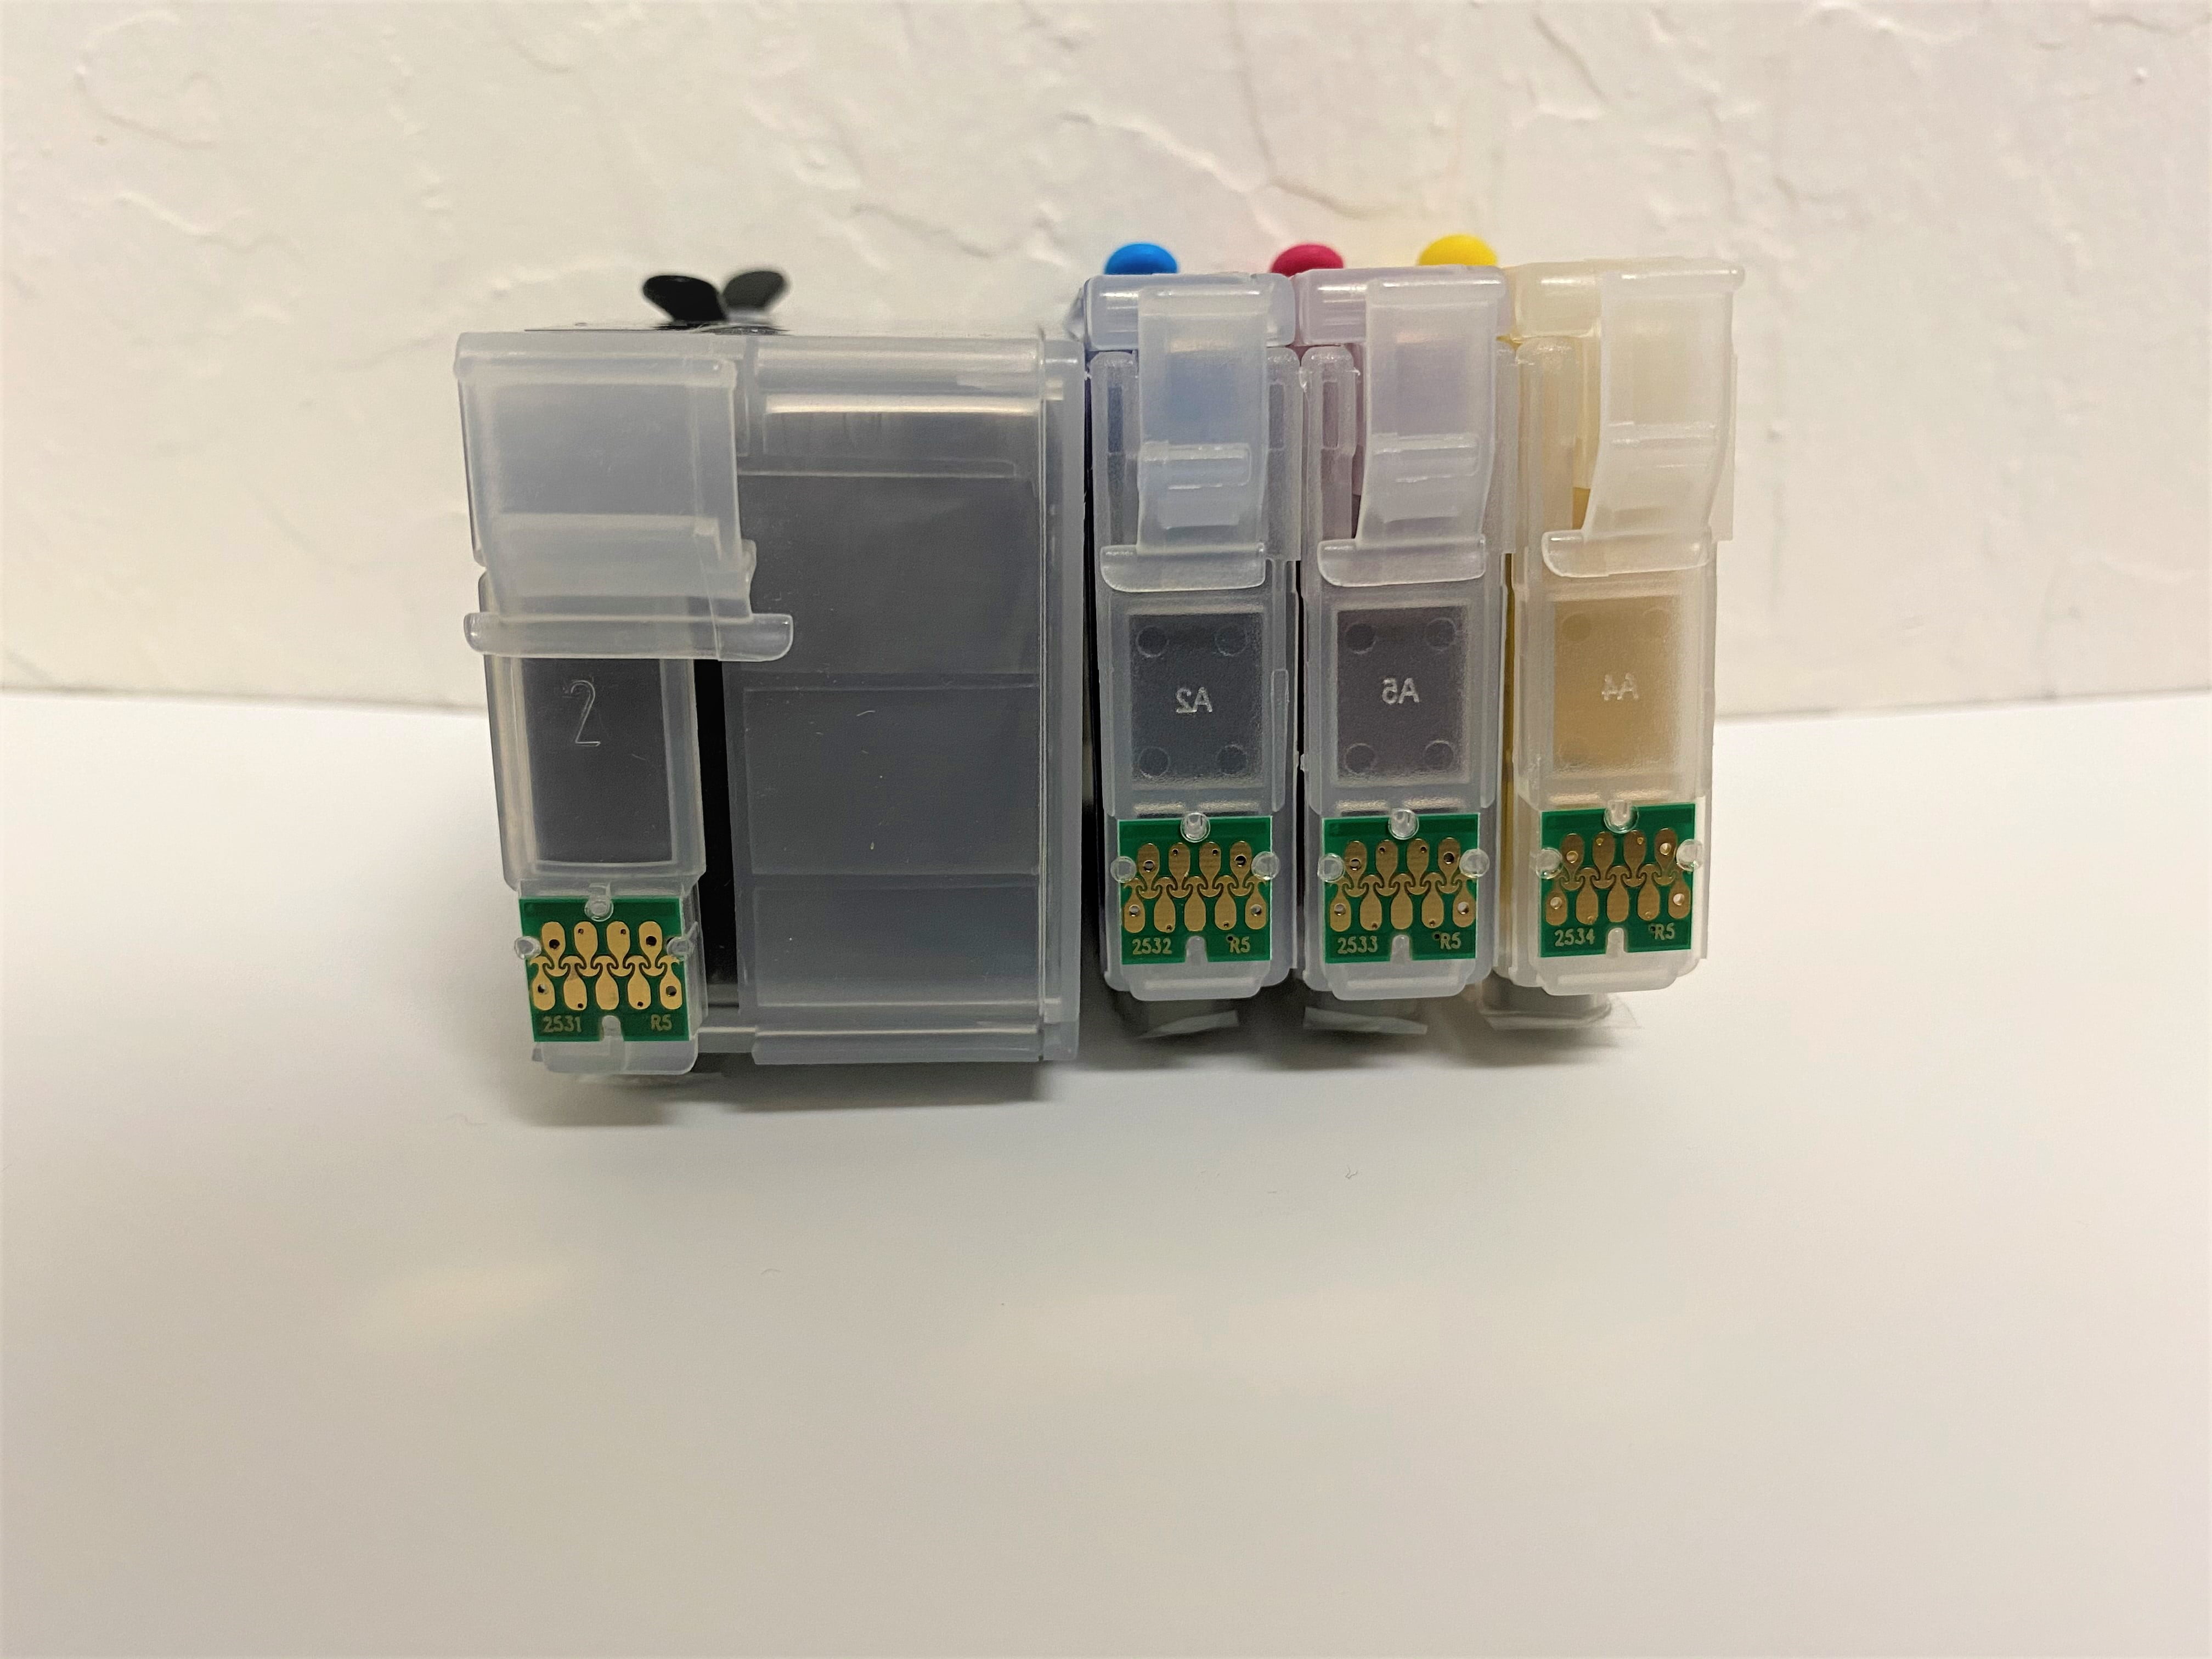 Performance-D 4x60ml Sublimation Ink Starter Kit for Epson WF-7210,  WF-7710, WF-7720, and related models - InkOwl